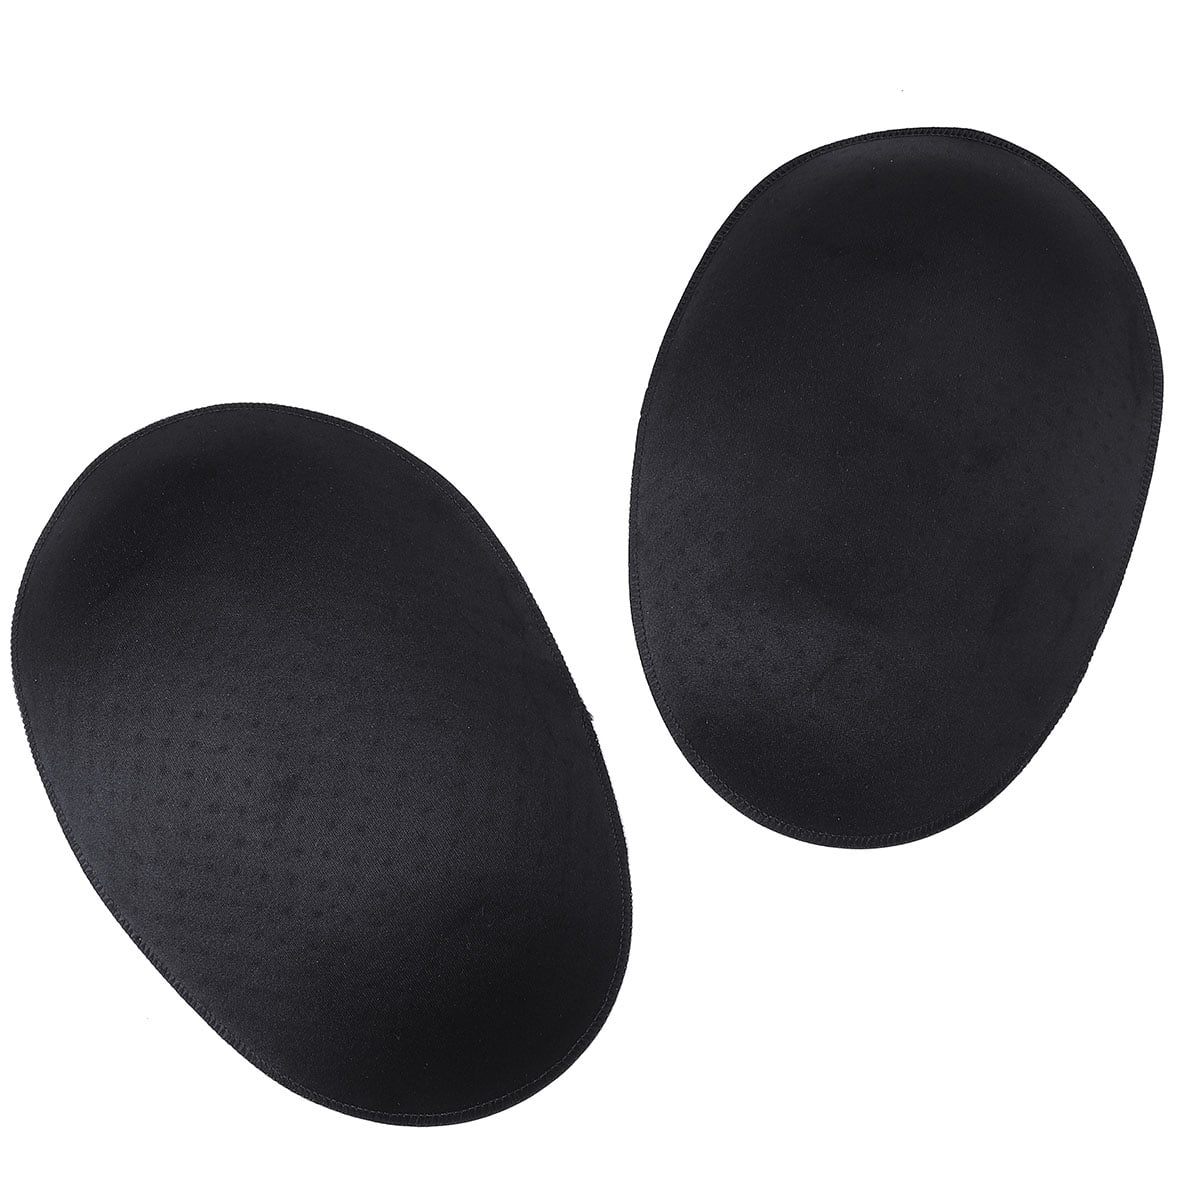 1 Pair 1.5cm Thick Oval Shape Hip Sponge Pads Buttocks Padded Hip Up ...